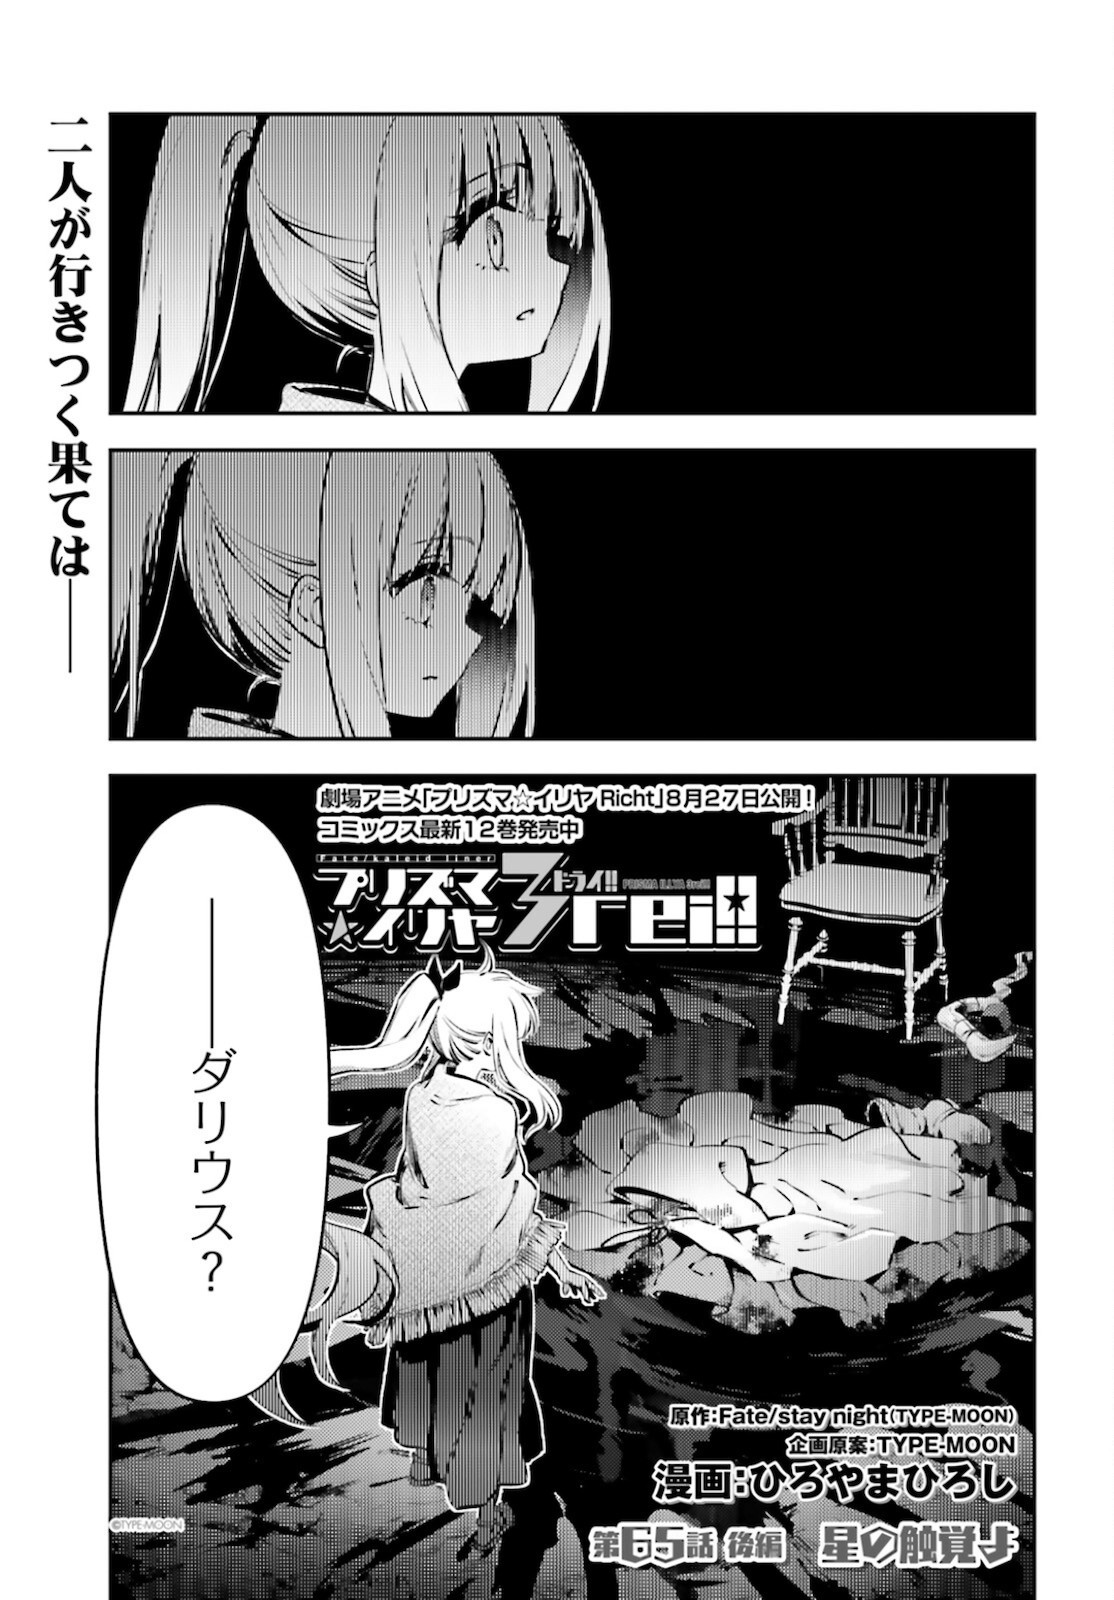 Fate/Kaleid Liner Prisma Illya Drei! - Chapter 65-2 - Page 4